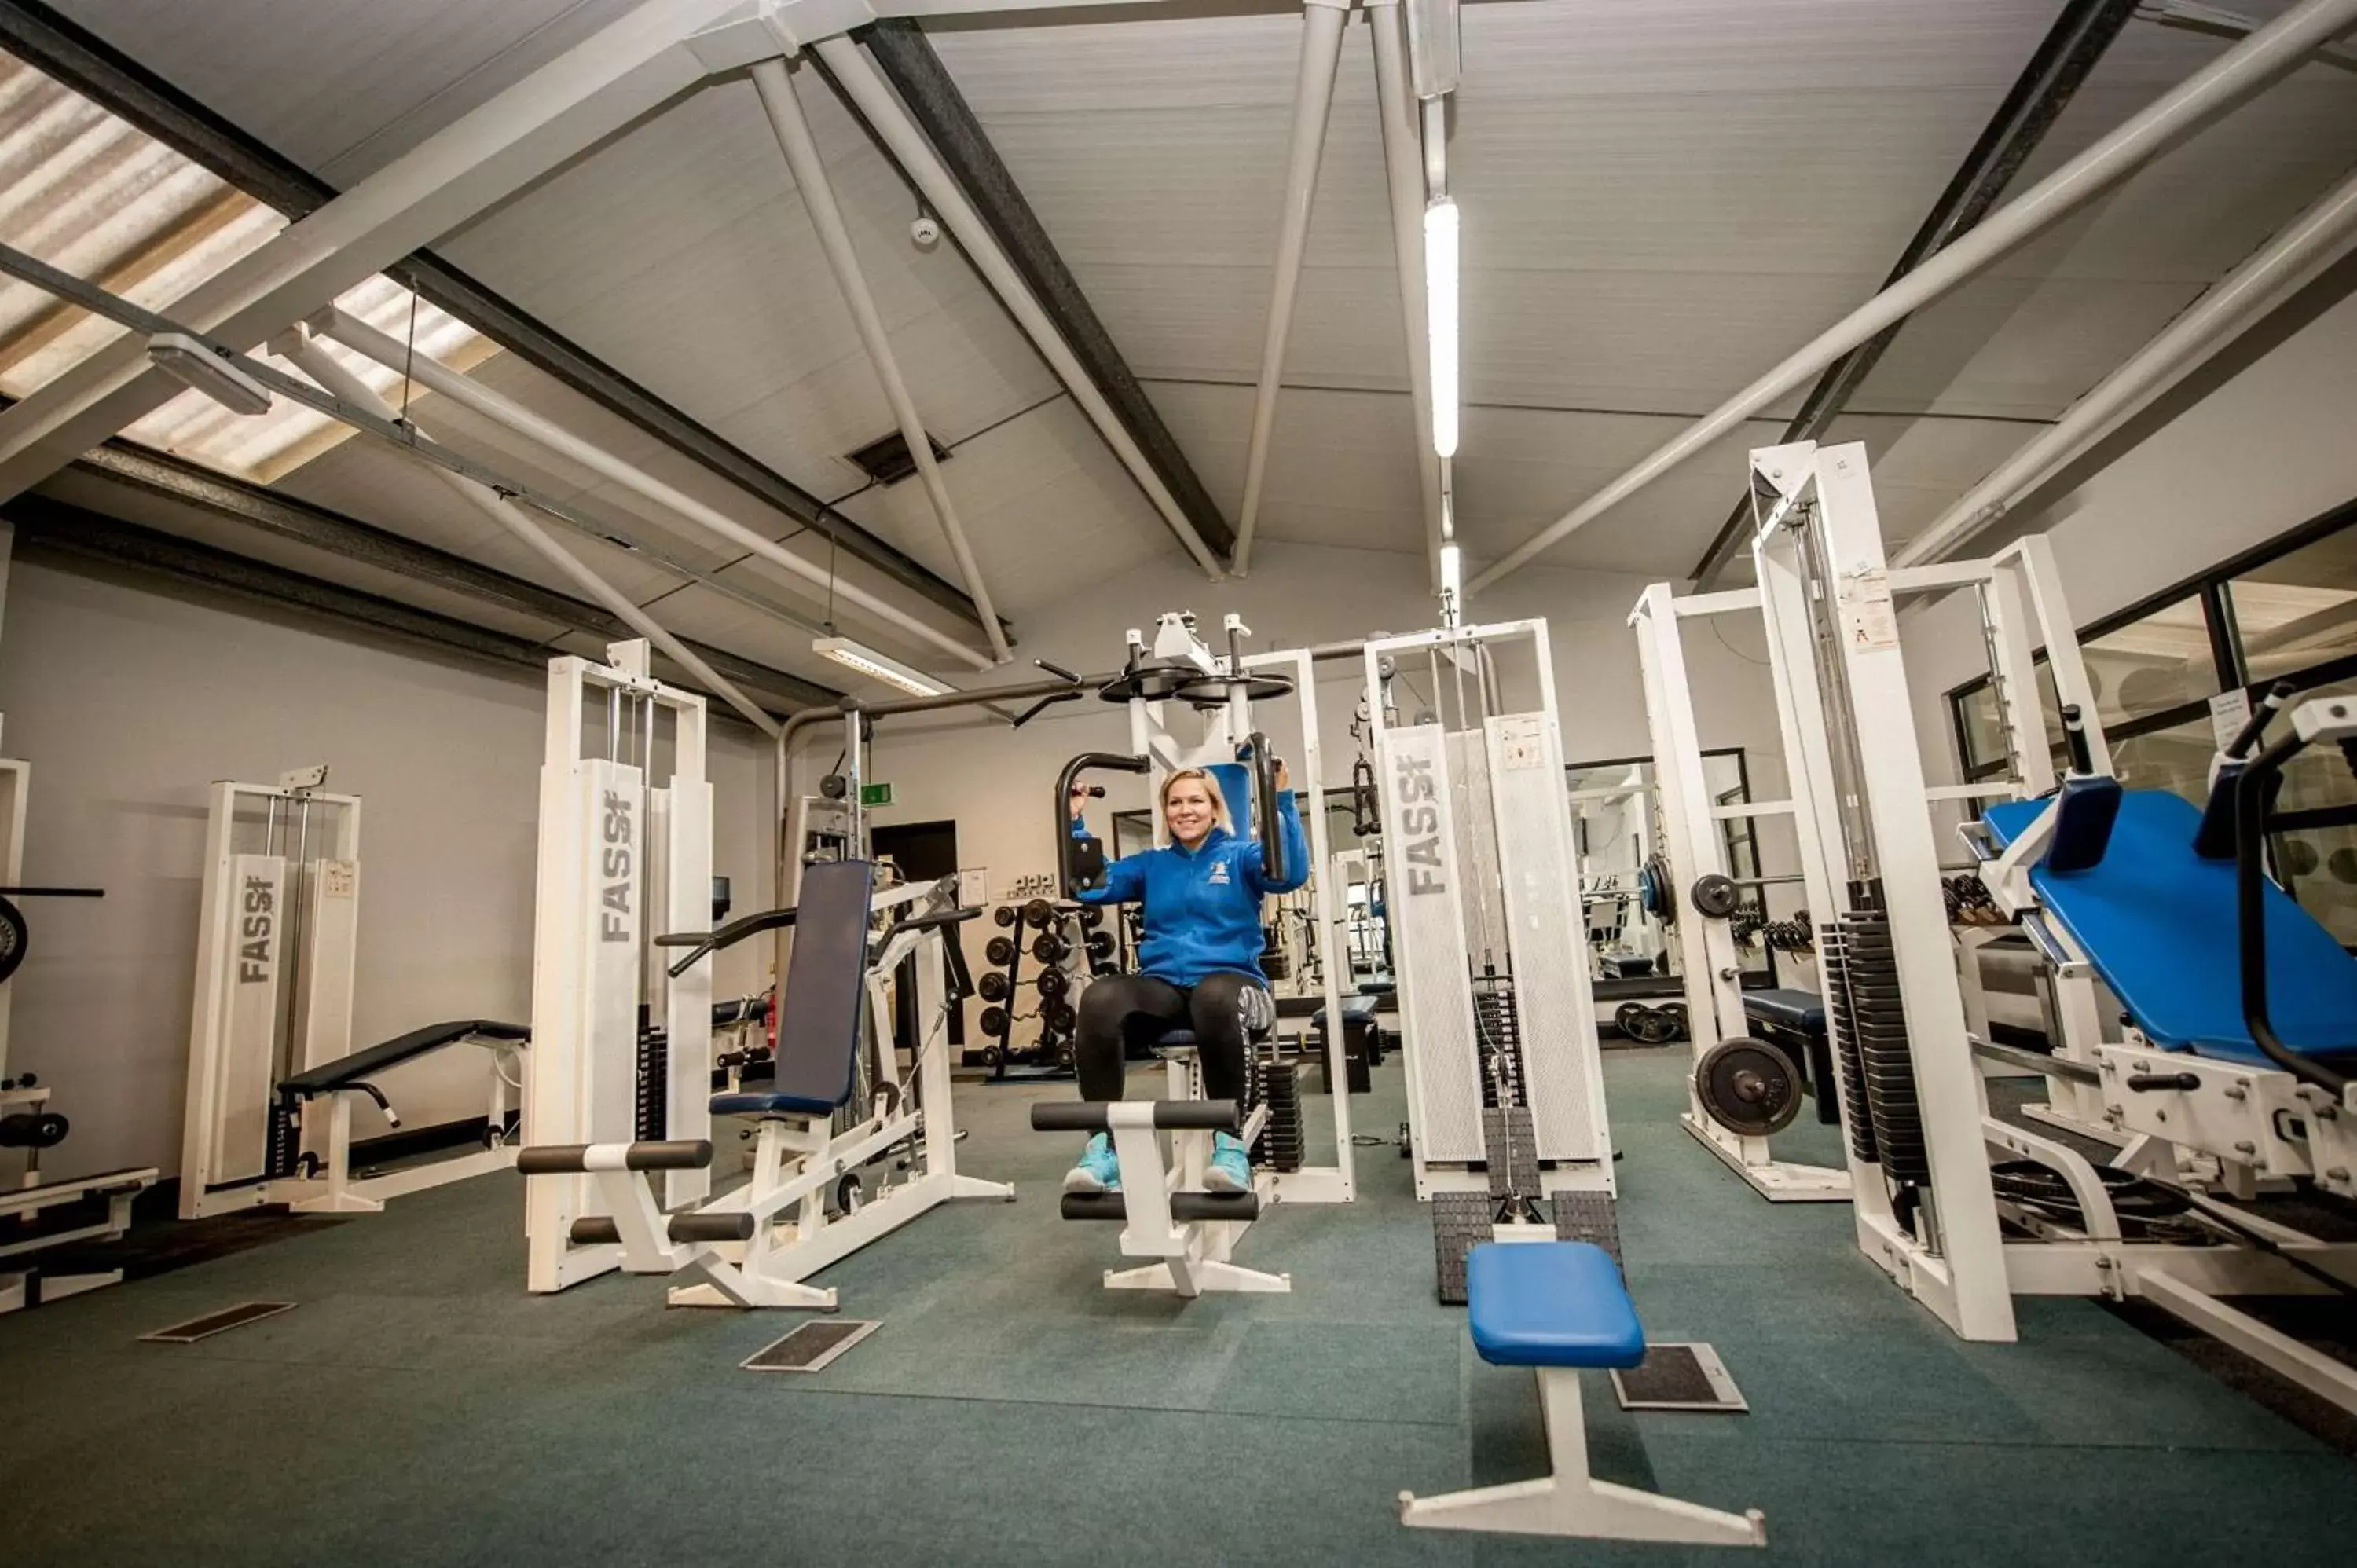 Fitness centre/facilities, Fitness Center/Facilities in Best Western Plus White Horse Hotel